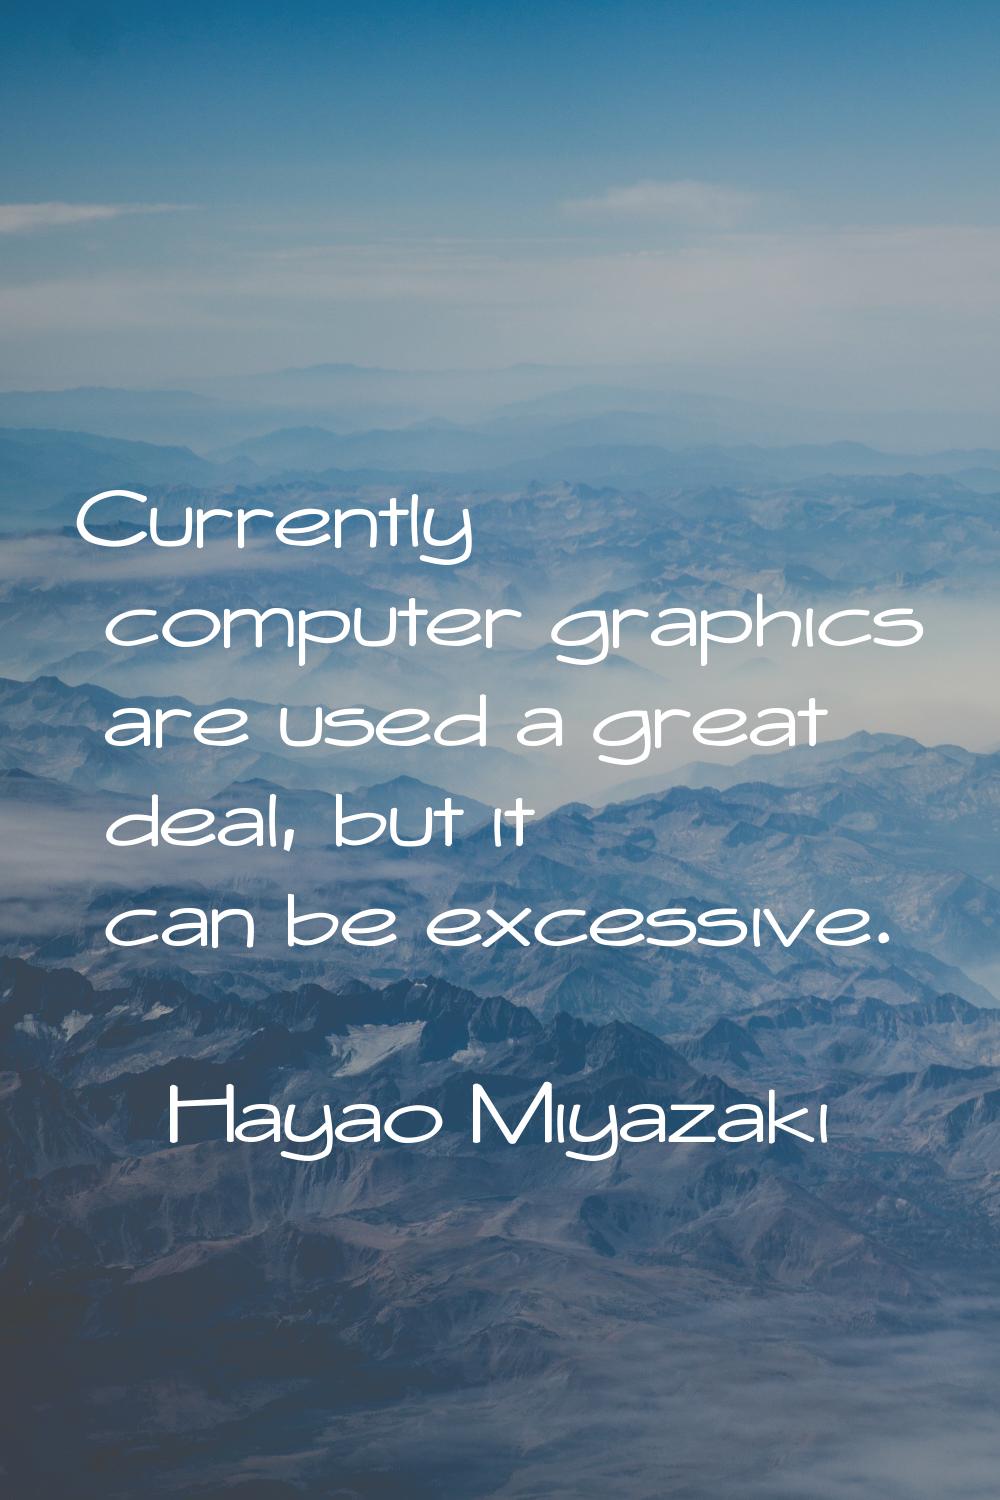 Currently computer graphics are used a great deal, but it can be excessive.